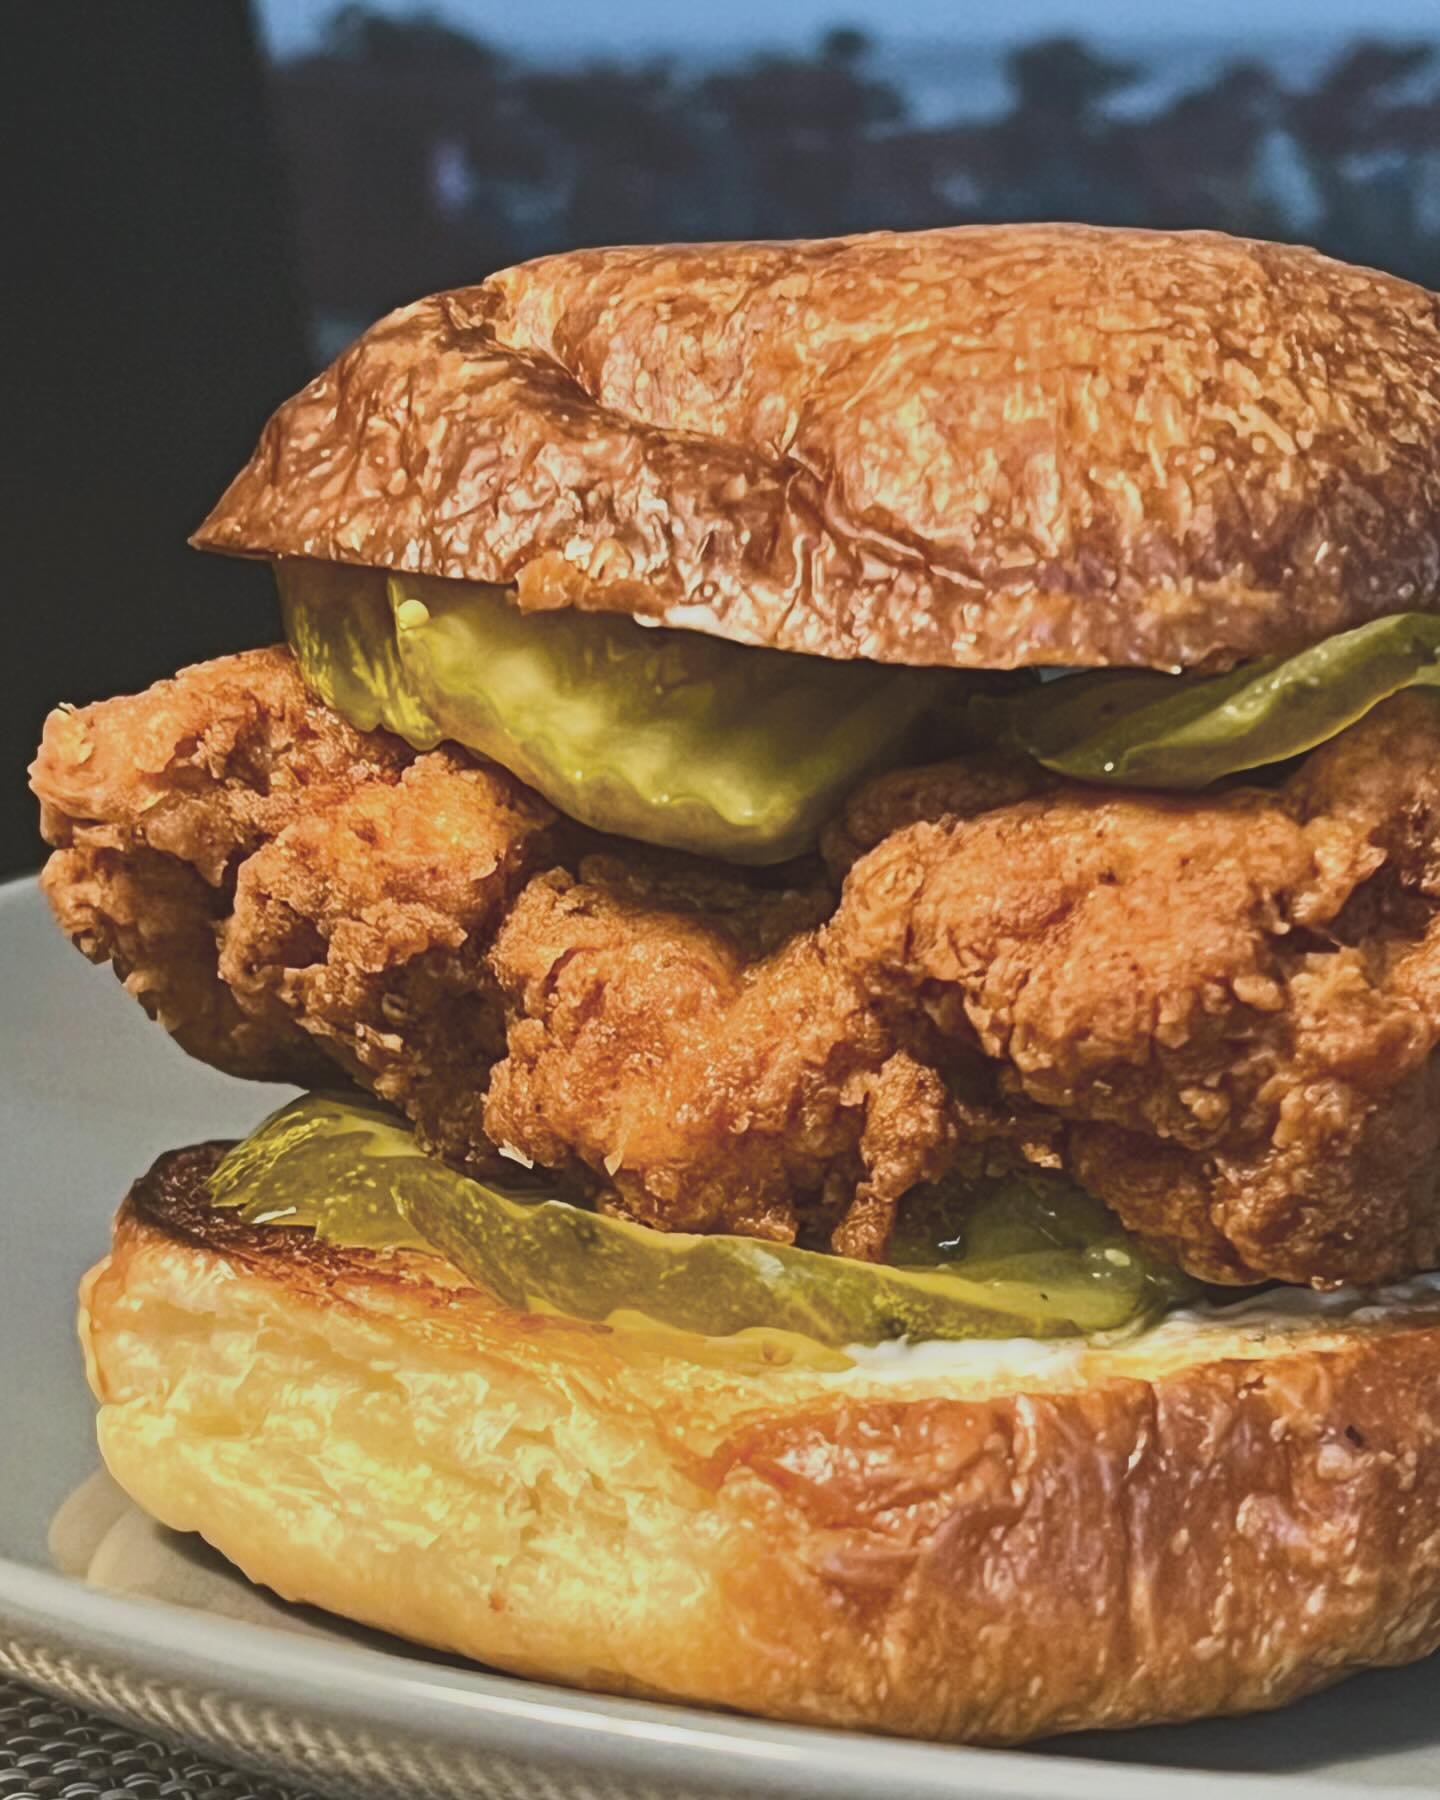 We made our very first ever Fried Chicken Sandwich with our sourdough brioche buns! Remarkably they turned out great and we&rsquo;ll be making this again soon! We&rsquo;ll be bringing more of these brioche buns to the farmers markets as grilling seas